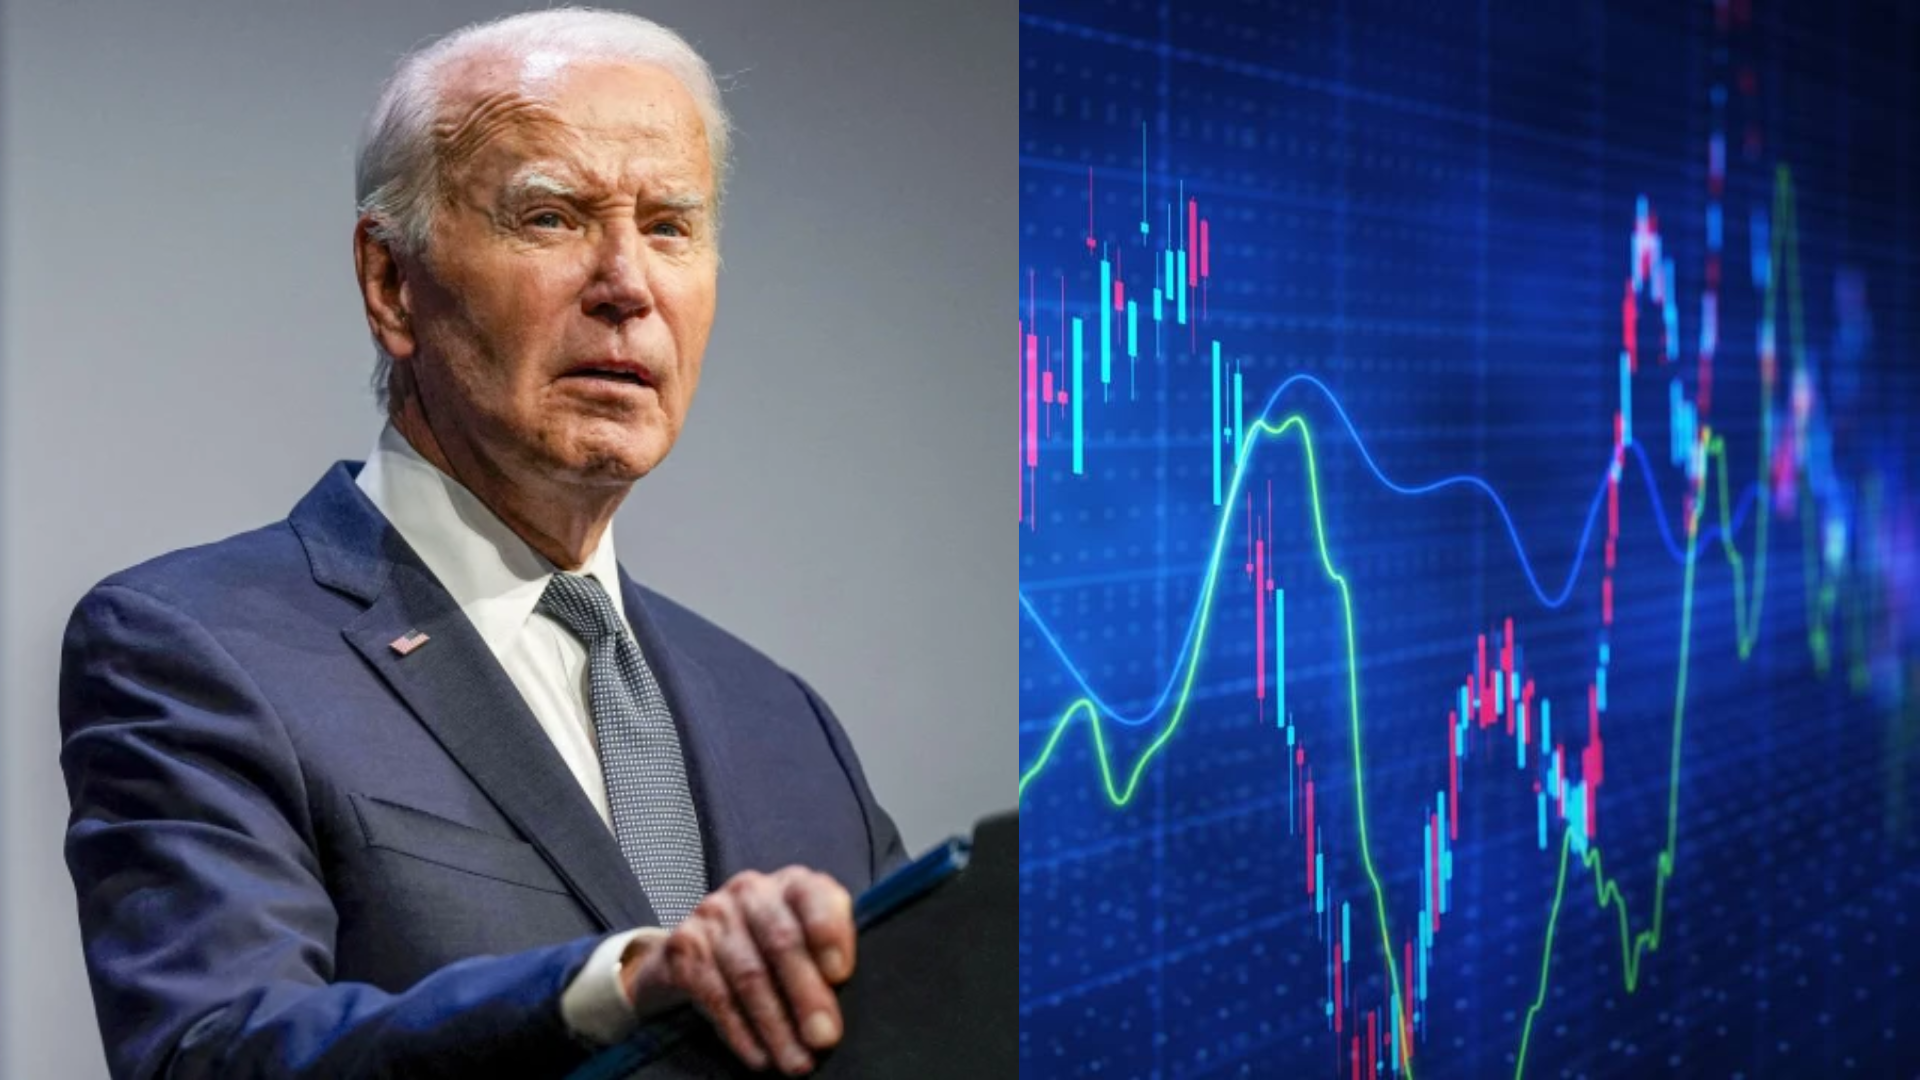 Market Volatility Expected Following Biden’s Withdrawal From Presidential Race